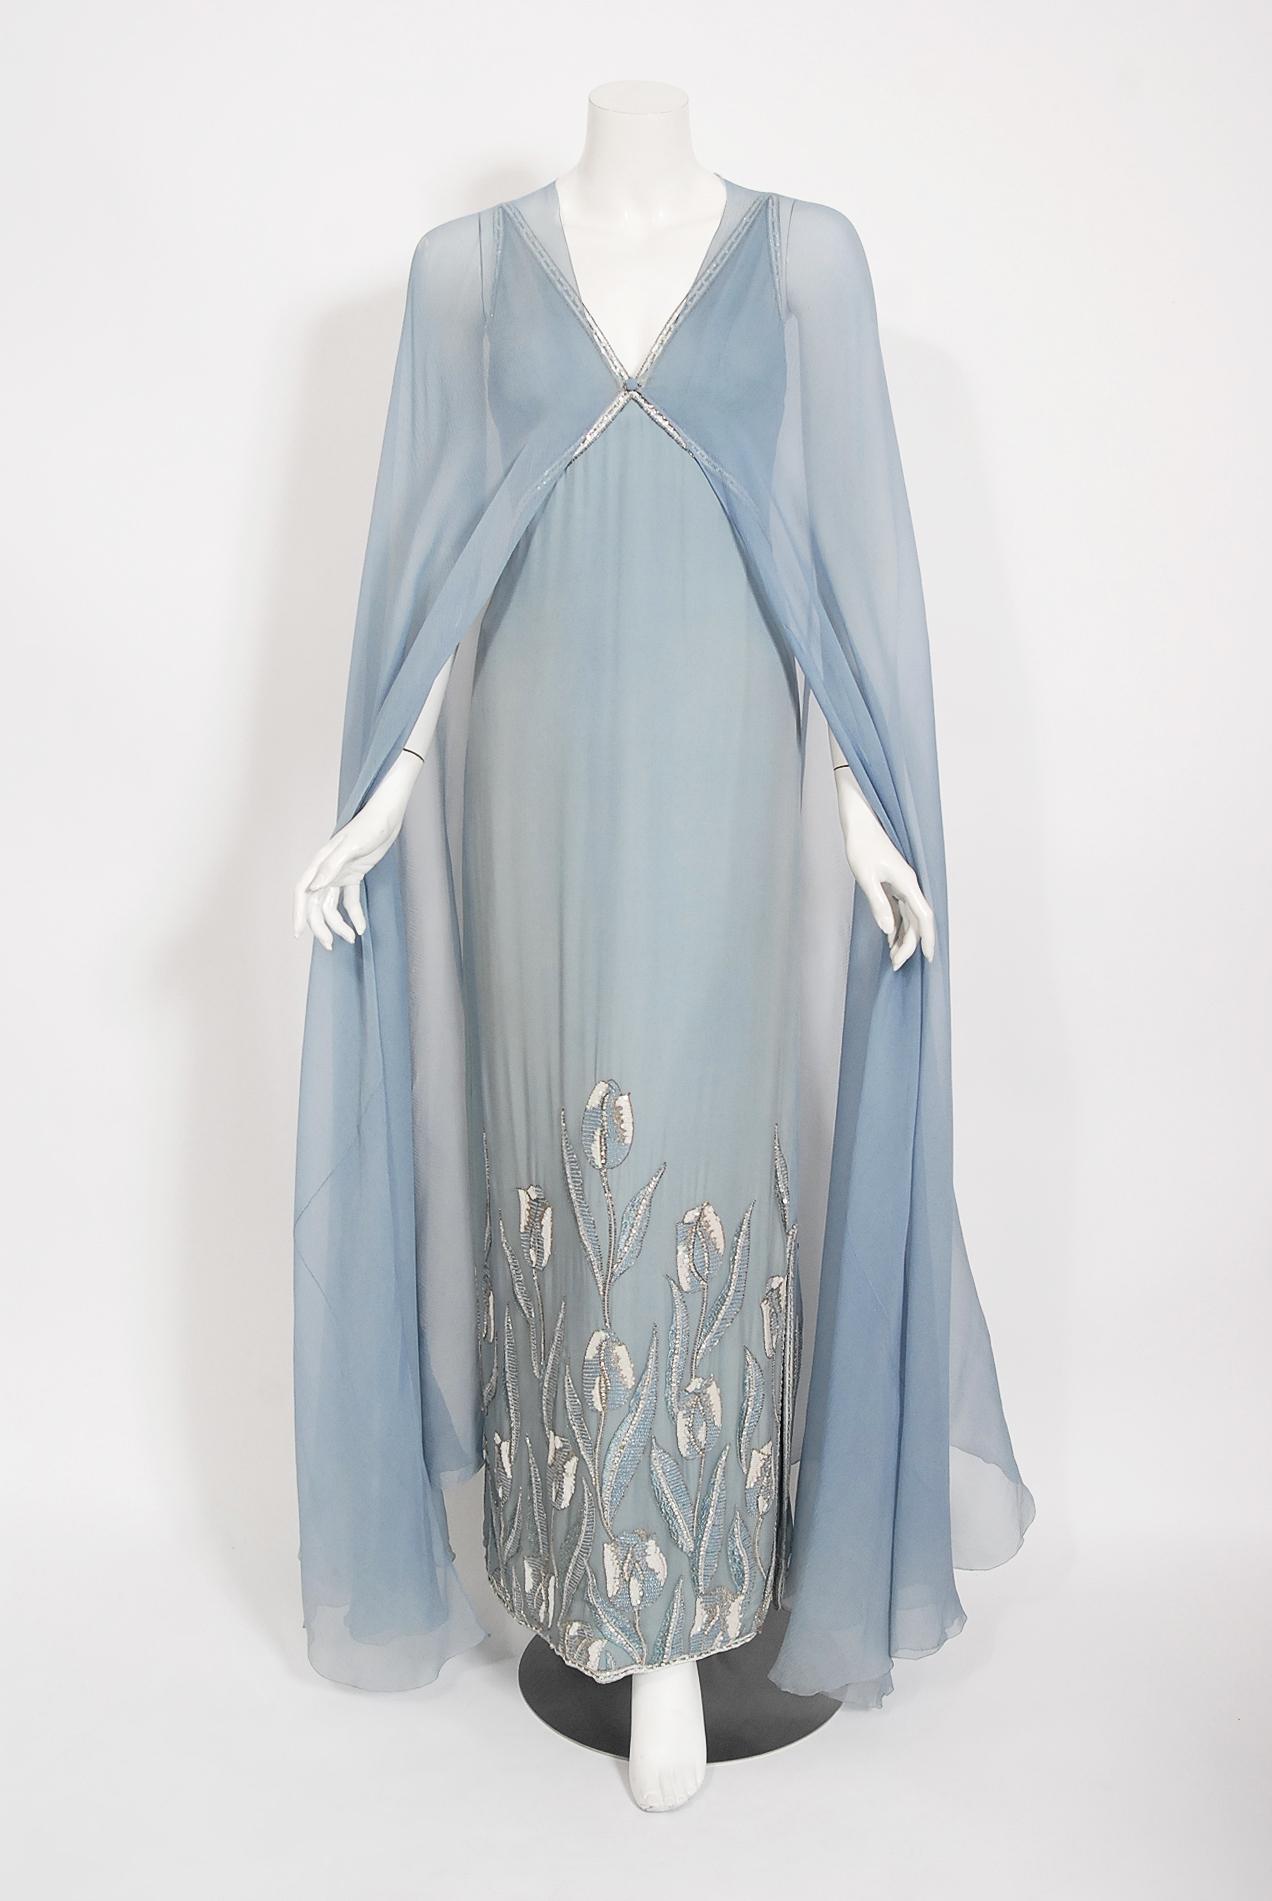 Chanel is known to be one of the most luxurious and decadent fashion houses in the world. This breathtaking powder blue gown with matching full-length cape from their 1981 Spring-Summer haute couture collection, is a perfect example of why this